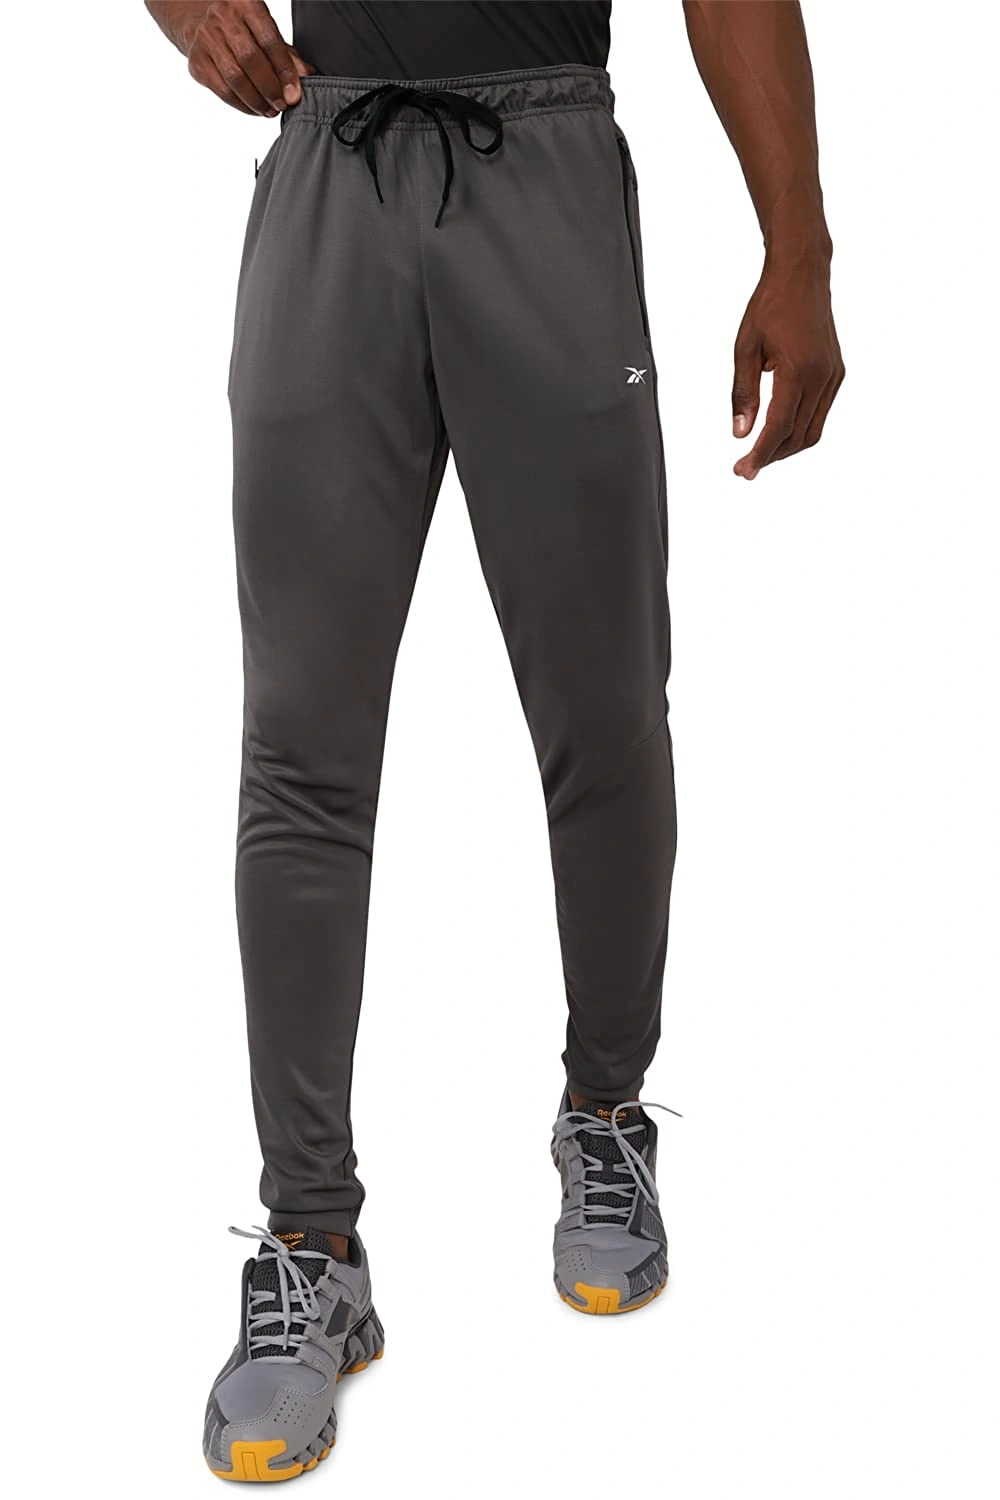 Reebok Mens Workout Training Pants Blue Hills in Rohtak at best price by  Pfc Clothing Private Limited  Justdial